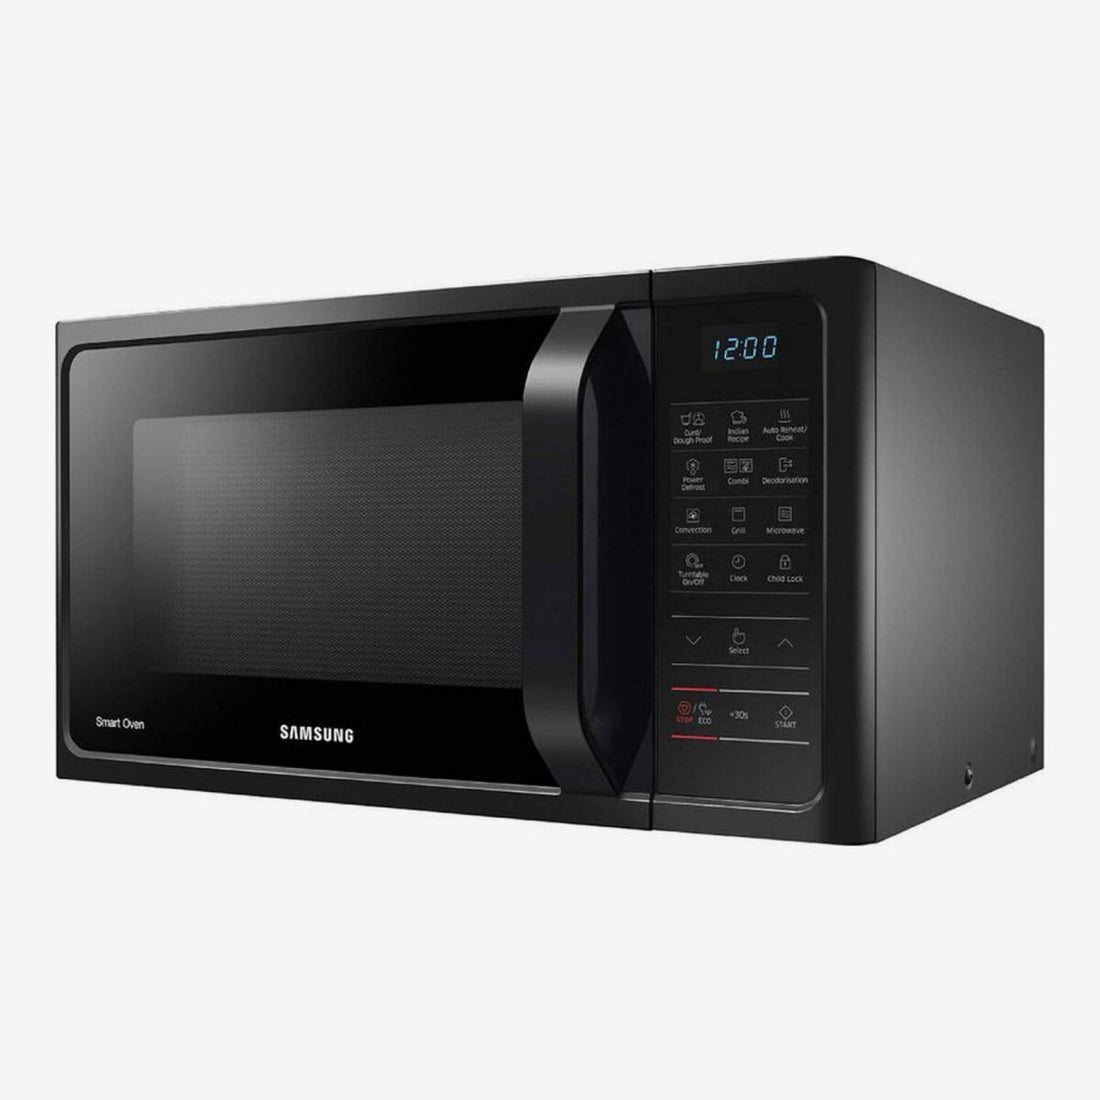 Do Microwave Ovens Affect Food and Our Health Harmfully?